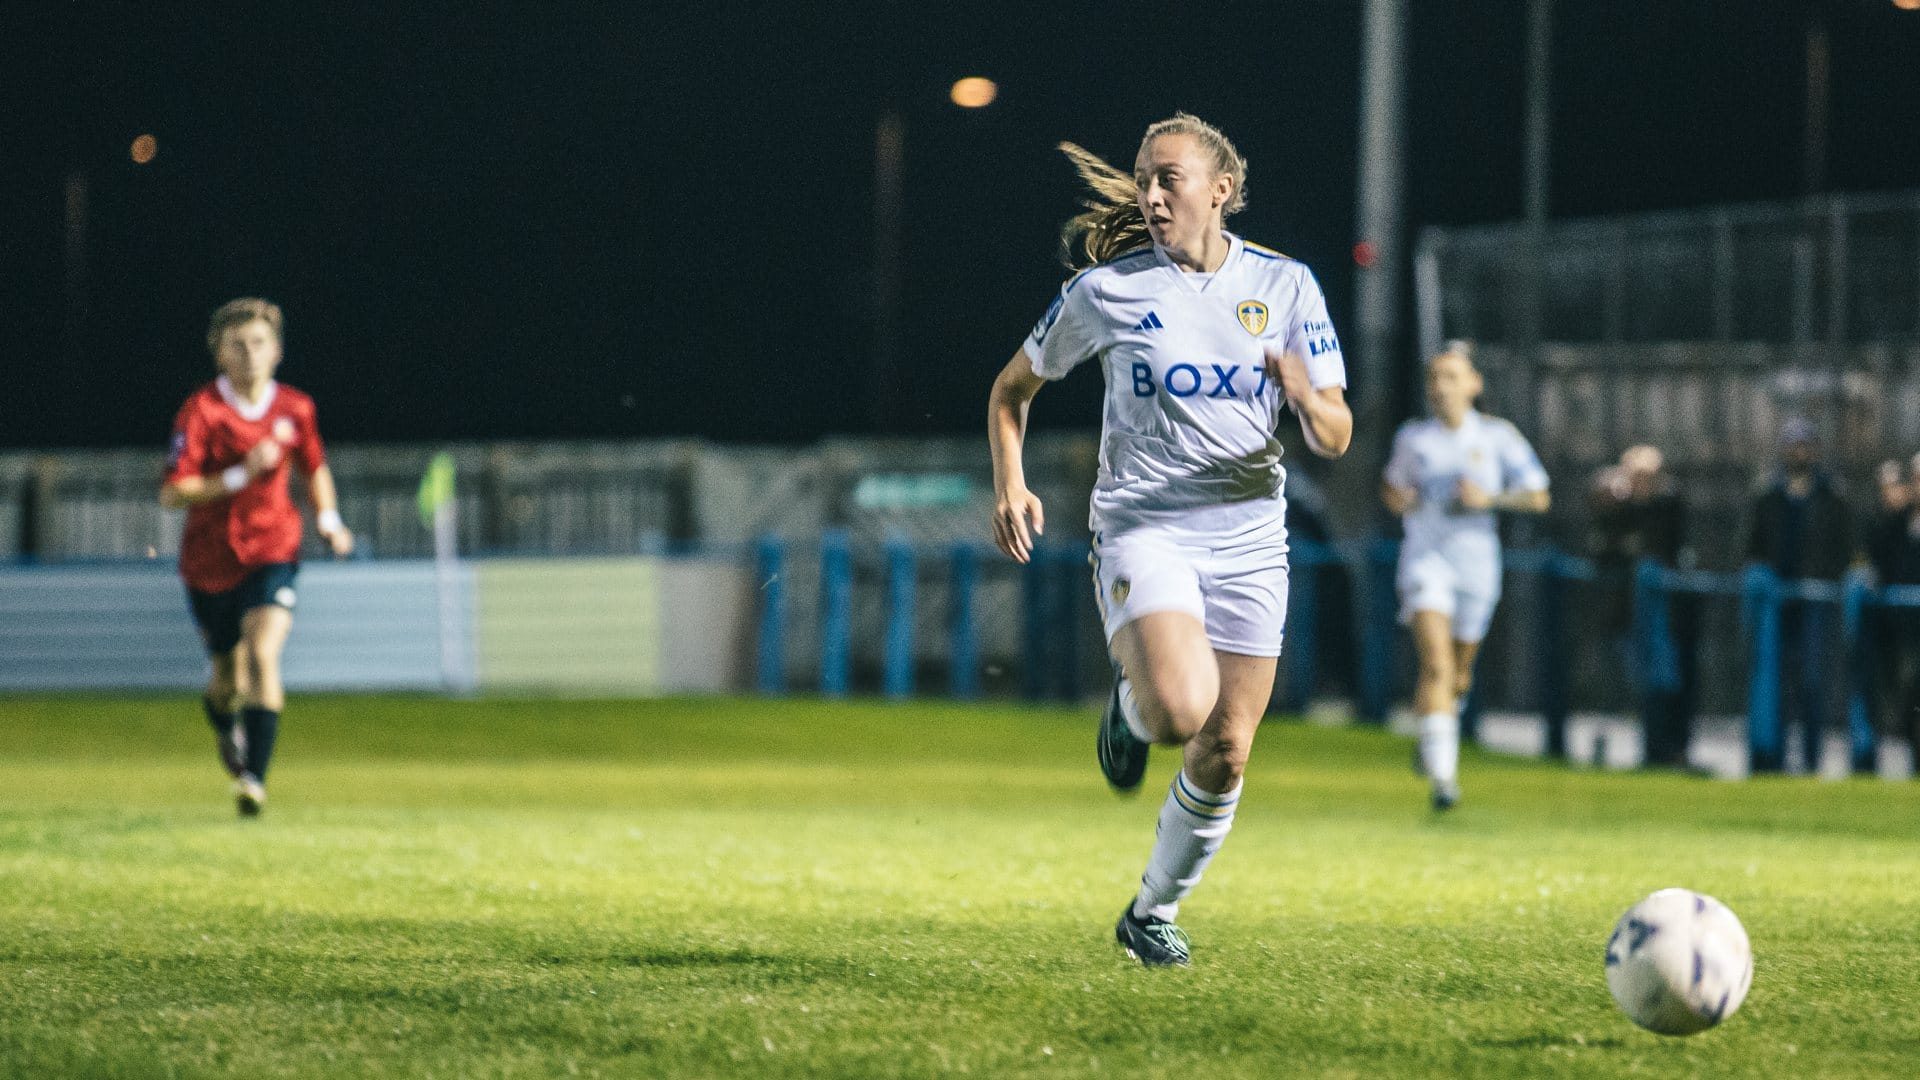 Jess Rousseau running down the wing for Leeds United Women, earlier in the season against FCUM